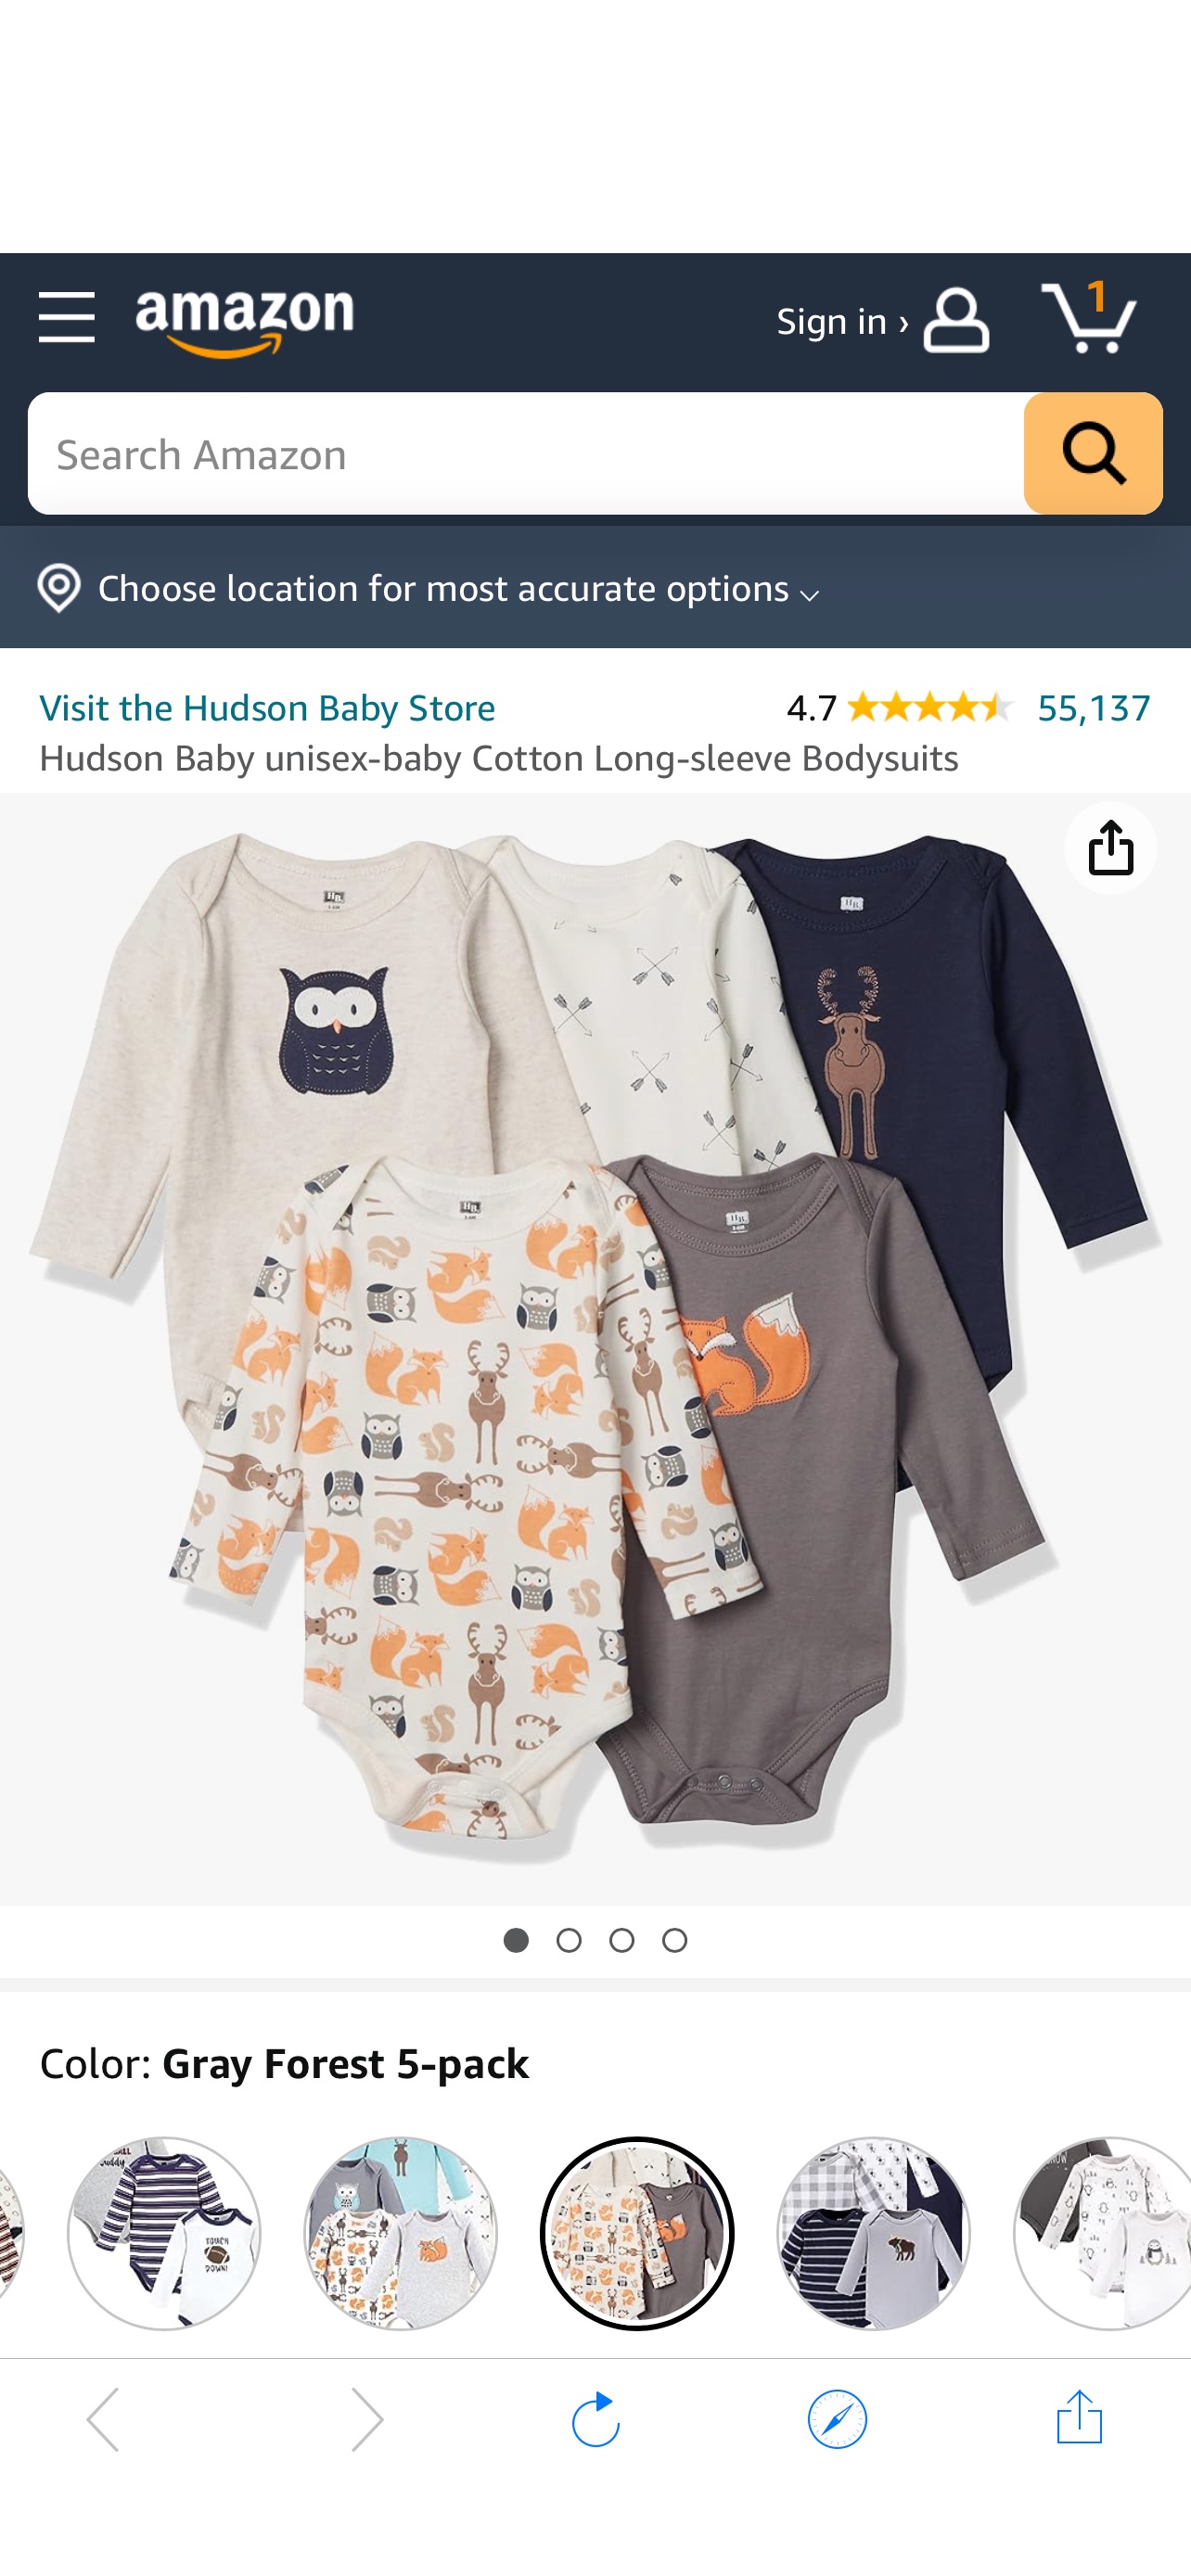 Amazon.com: Hudson Baby Unisex Baby Cotton Long-sleeve Bodysuits, Forest, 3-6 Months US: Clothing, Shoes & Jewelry宝宝衣服